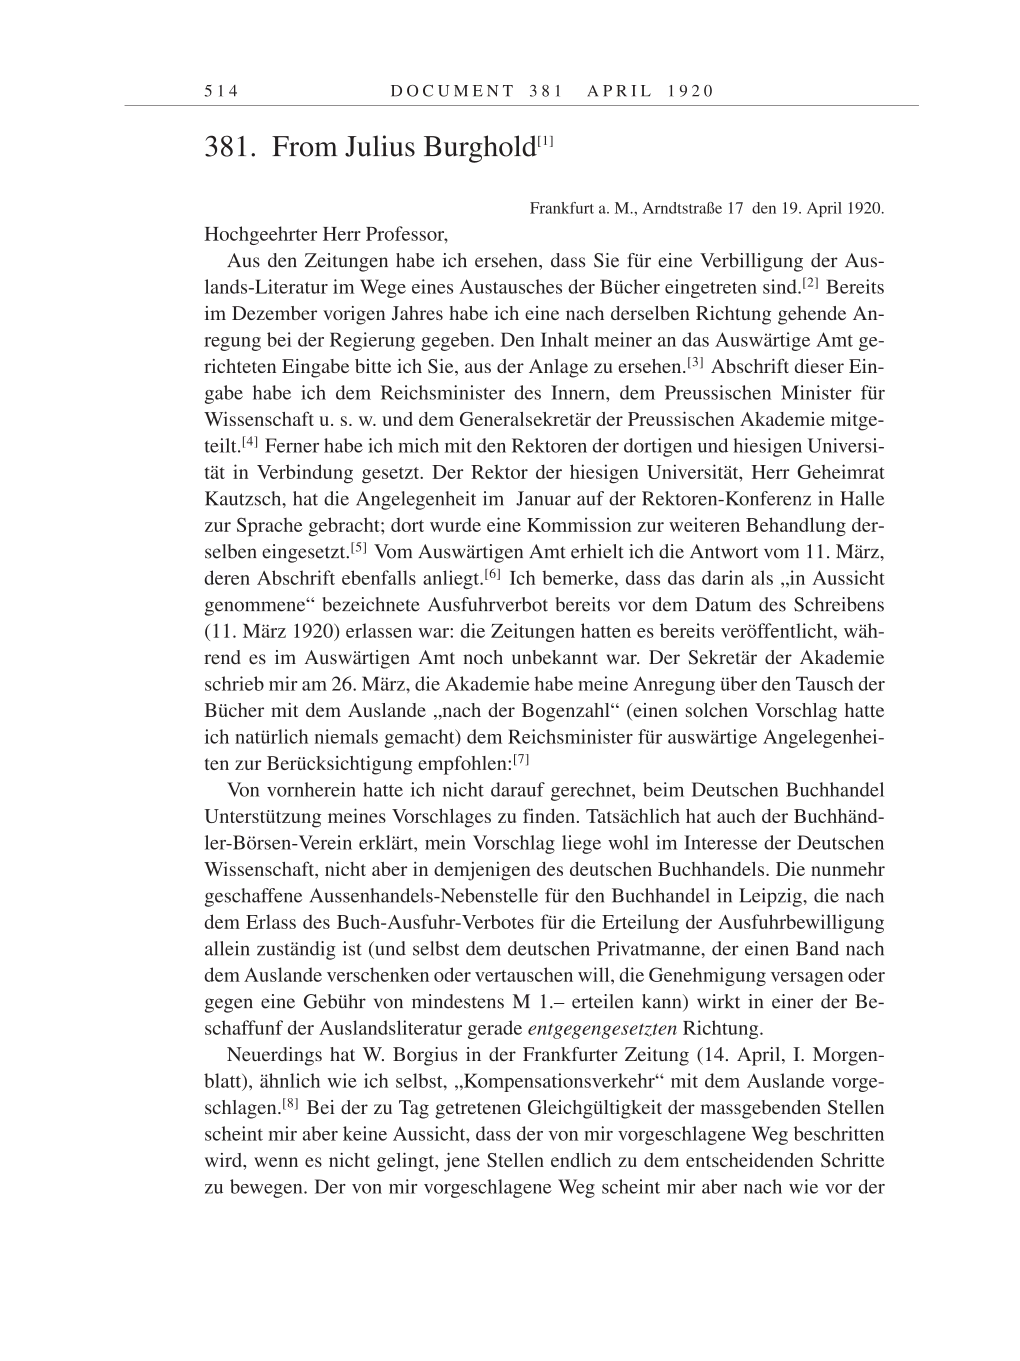 Volume 9: The Berlin Years: Correspondence January 1919-April 1920 page 514